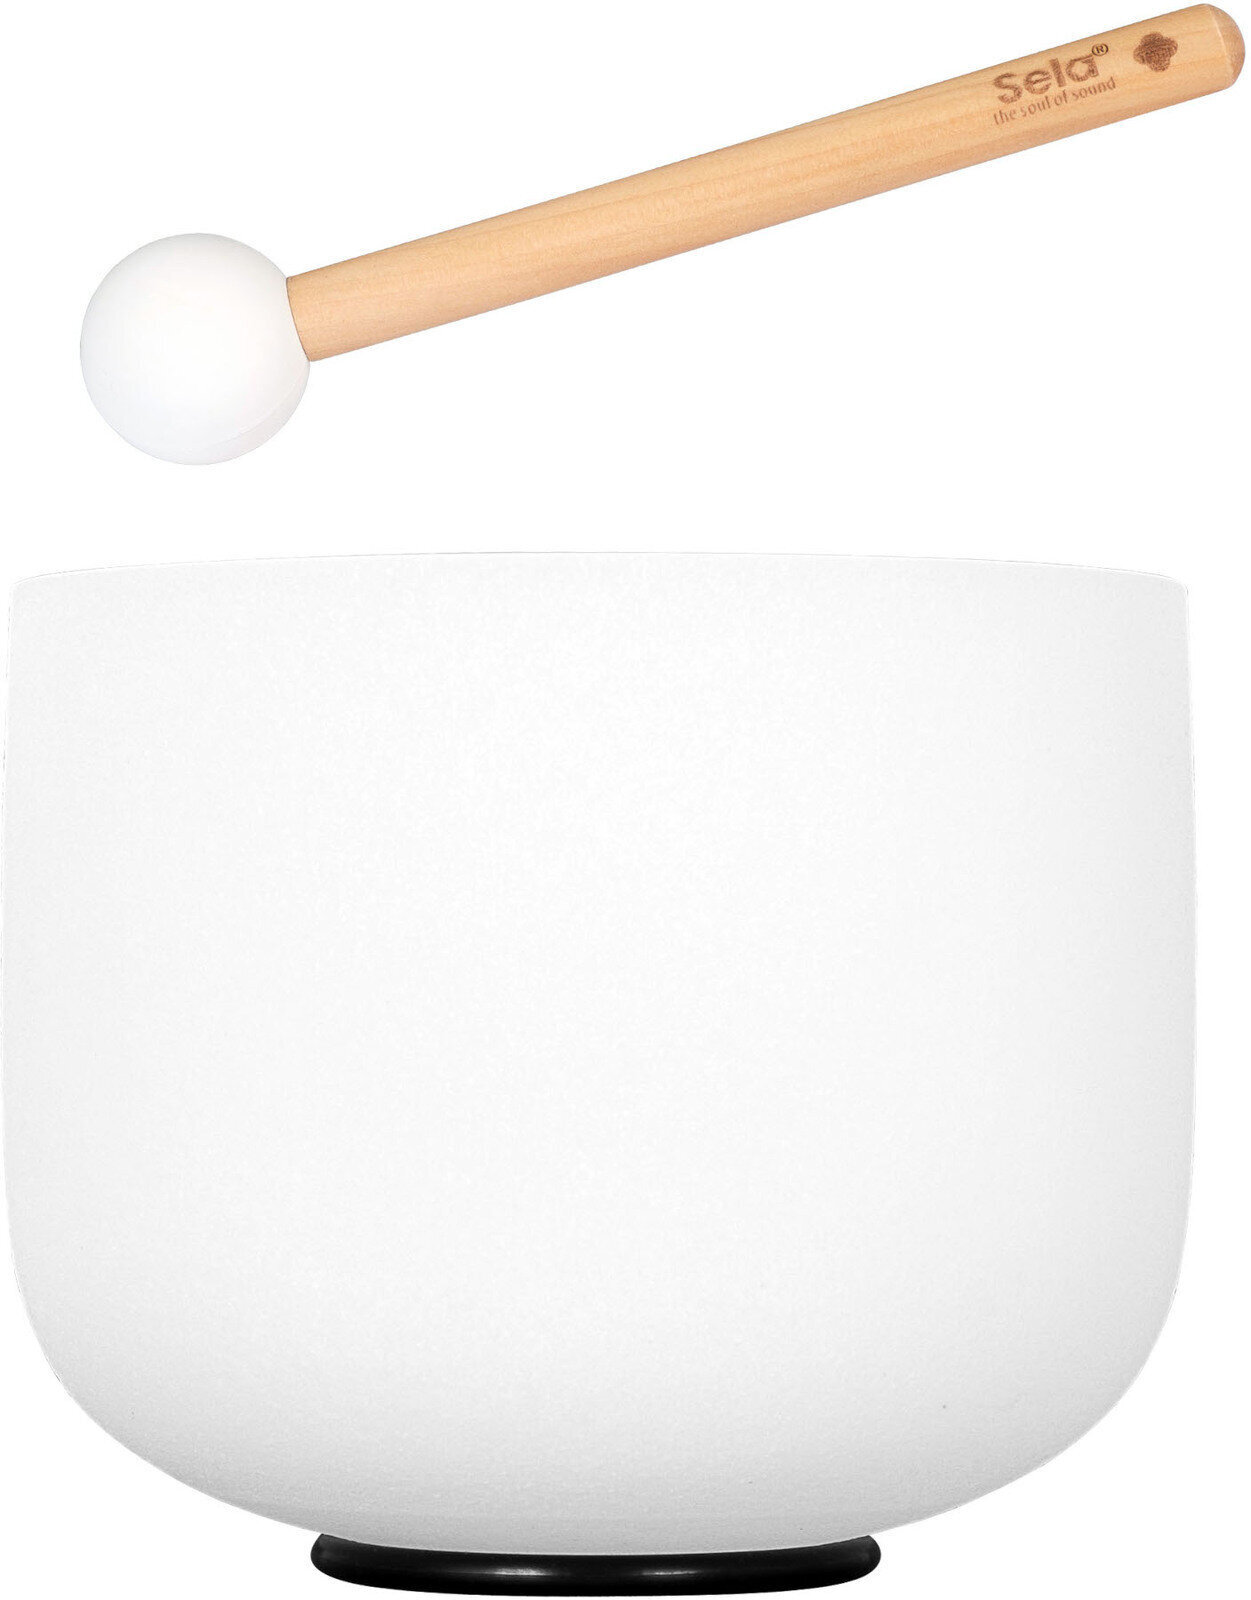 Meditazione e Musicoterapia Sela 8" Crystal Singing Bowl Frosted 432 Hz F incl. 1 Wood Mallet